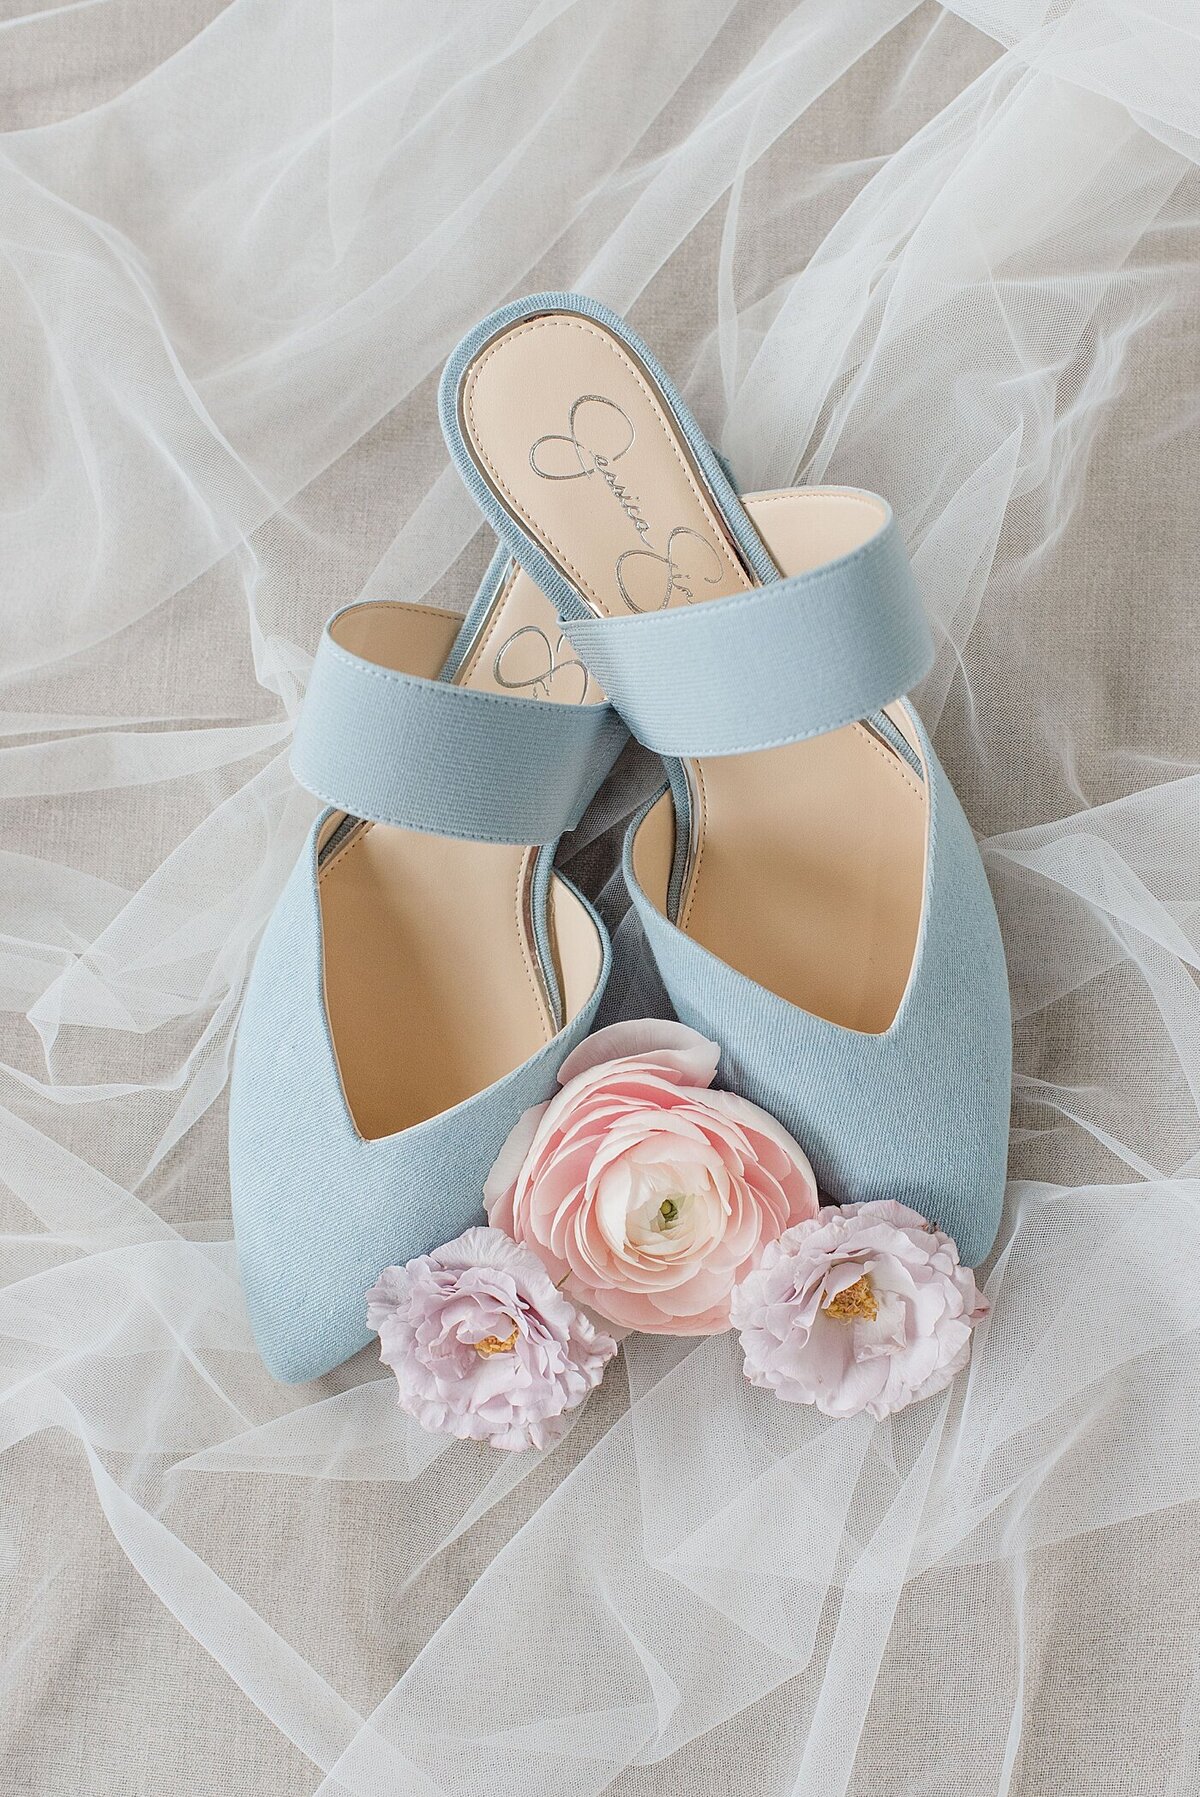 Blue wedding shoes with floral by Old Slate Florals in Ohio